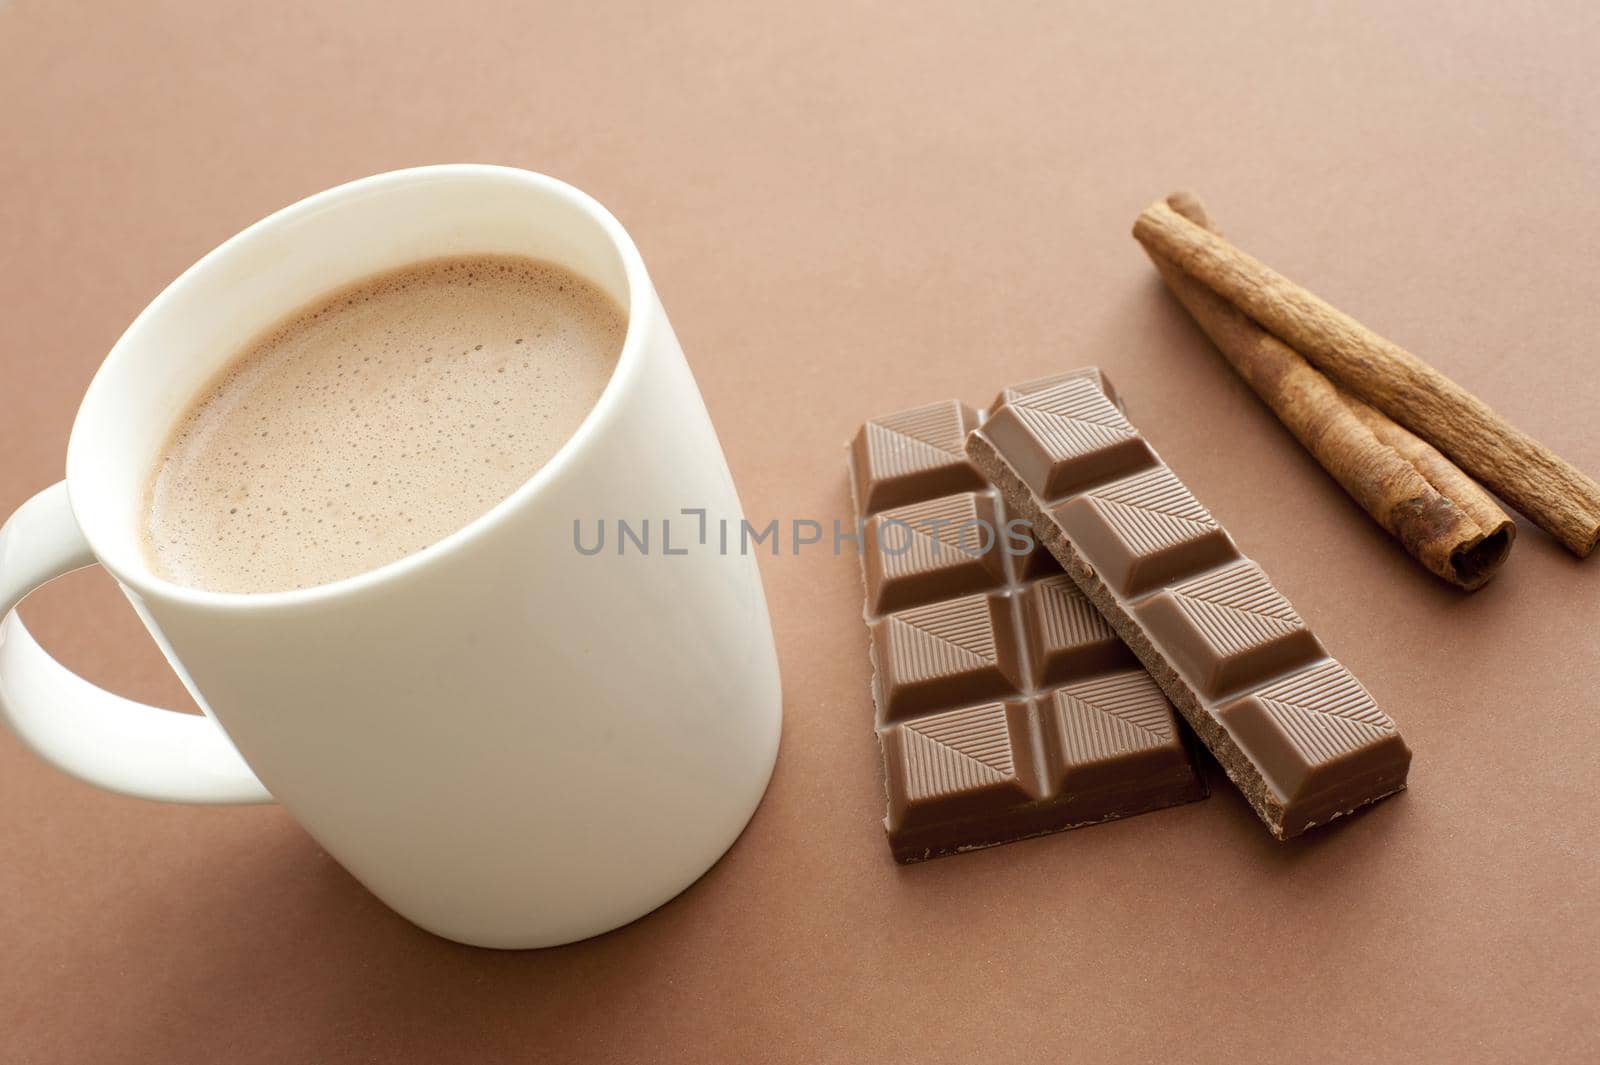 Delicious mug of hot cinnamon chocolate drink for a cold winter day with stick cinnamon and a partial bar of chocolate lying alongside